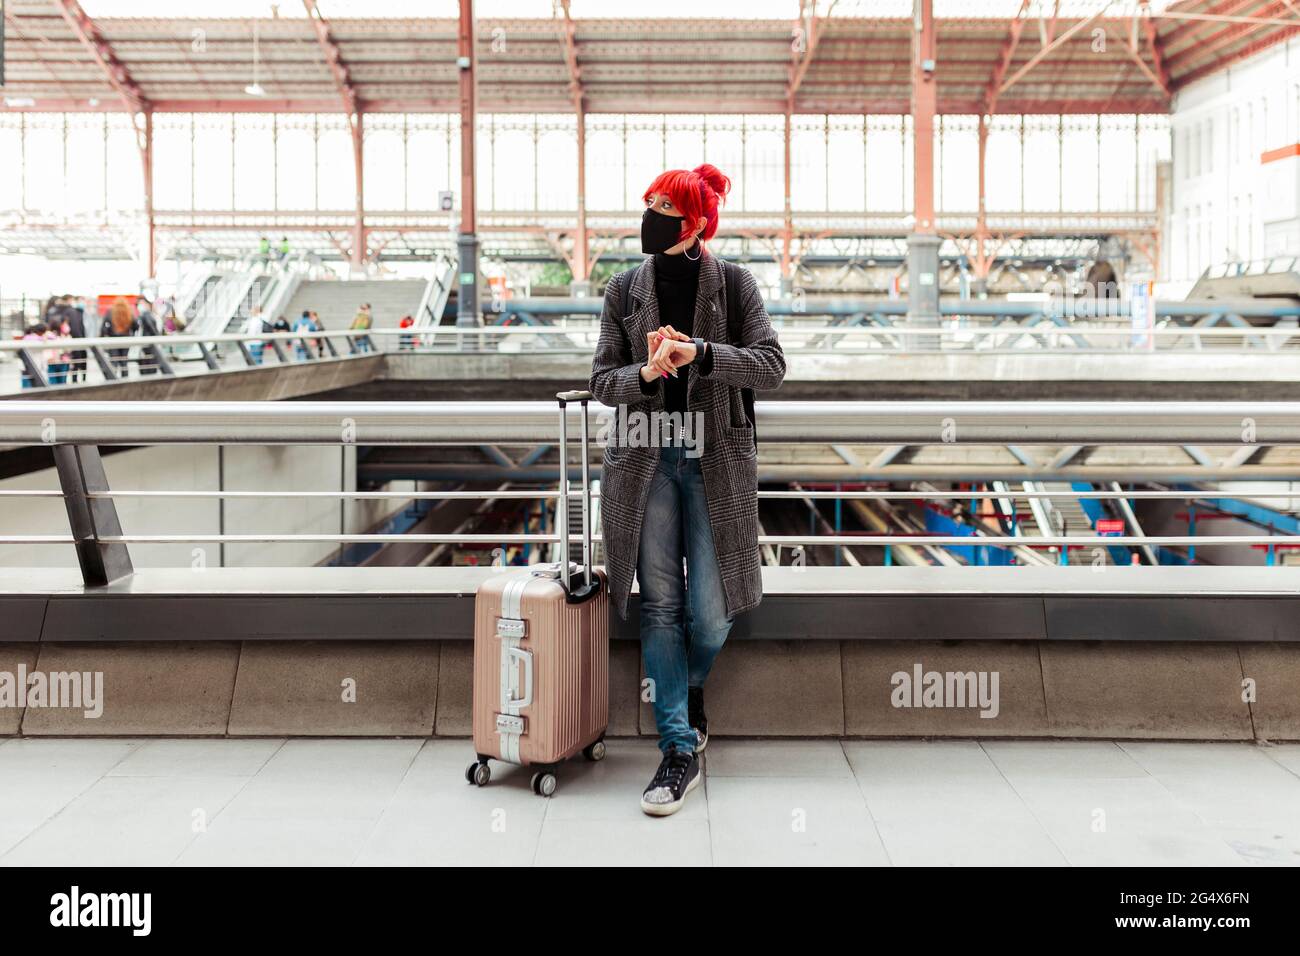 Redheaded woman with wheeled luggage waiting at railroad station Stock Photo